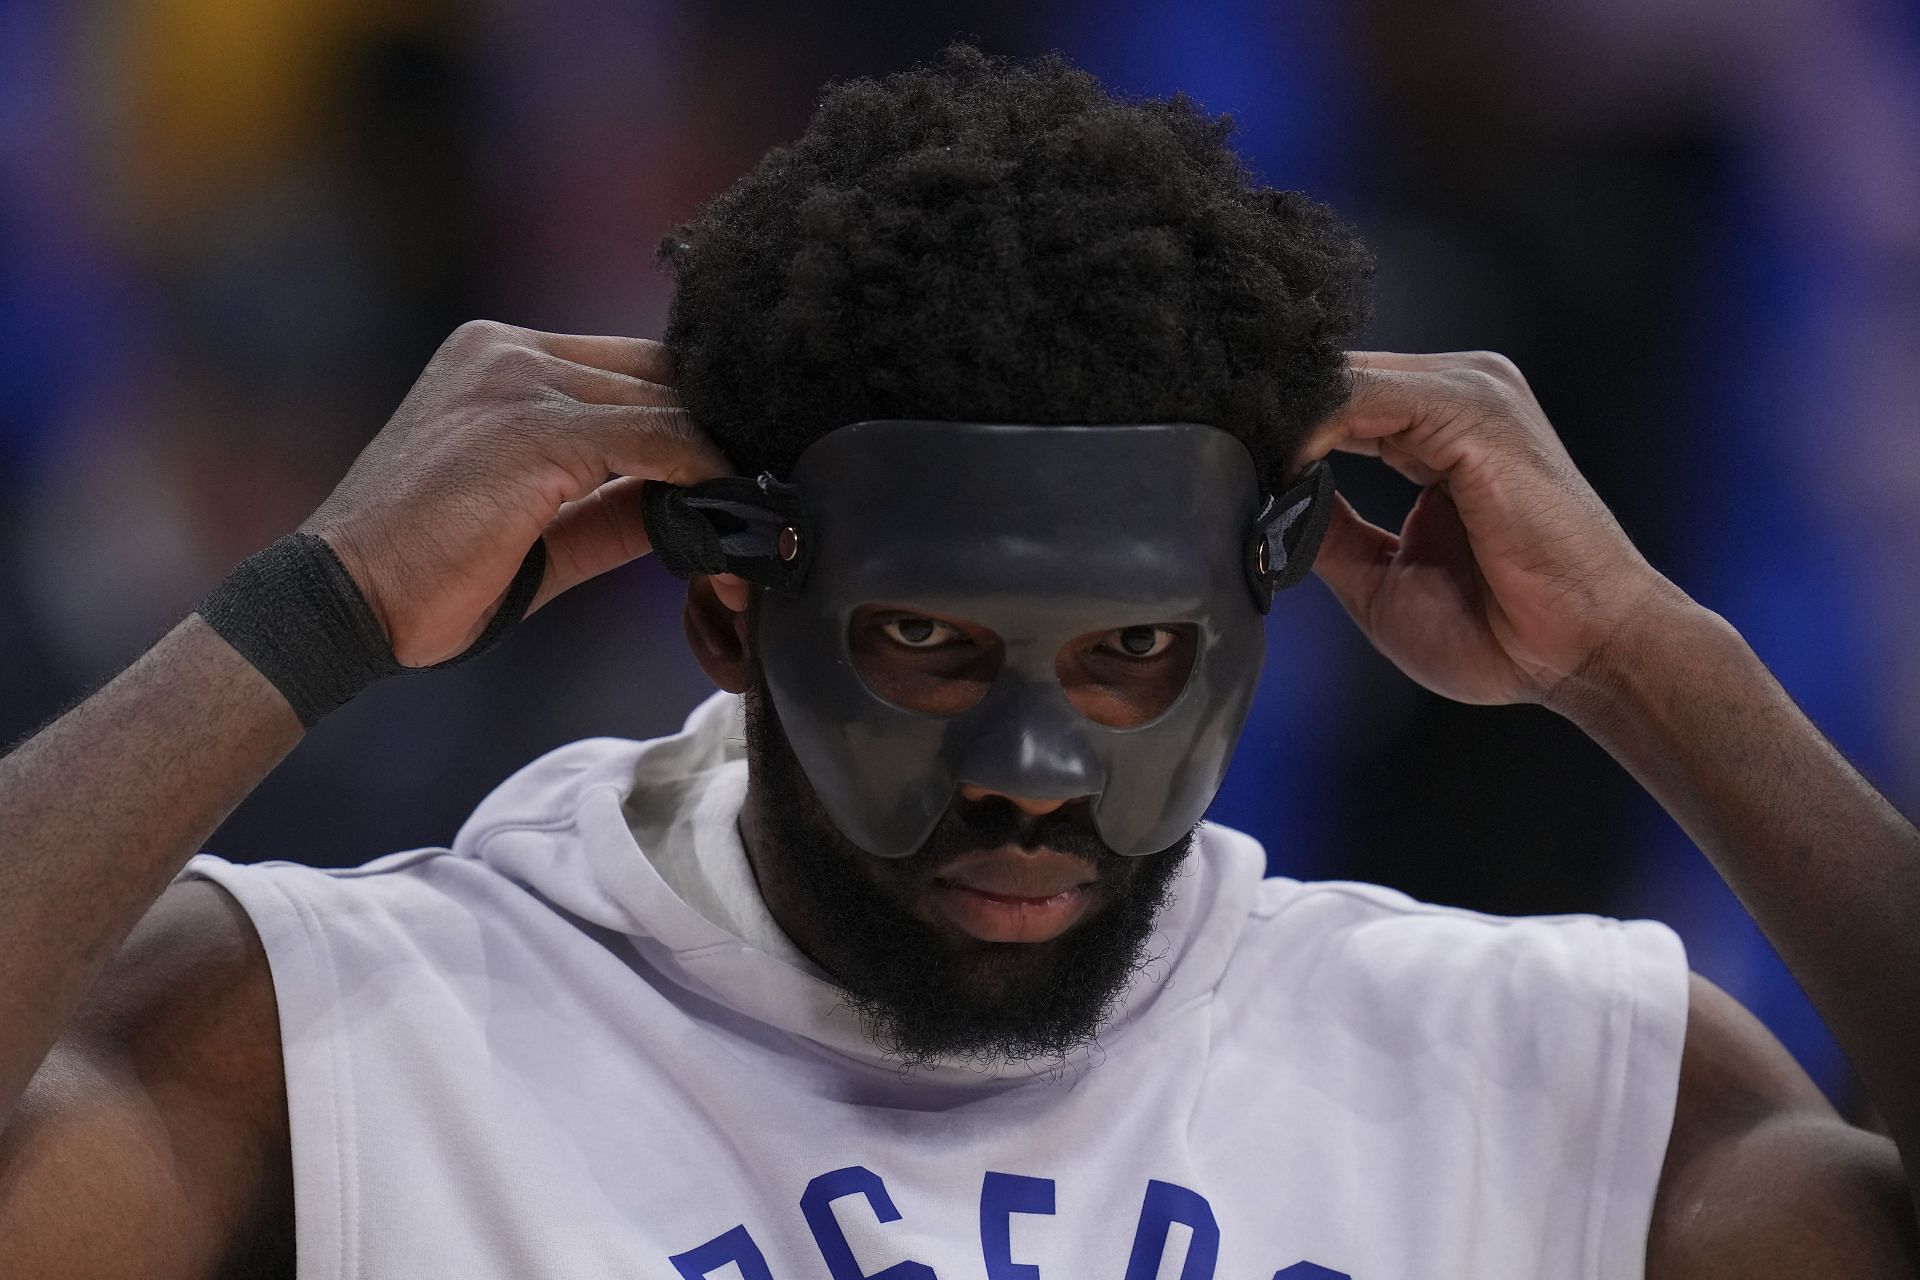 Joel Embiid puts on his mask prior to Game 3 against the Miami Heat.